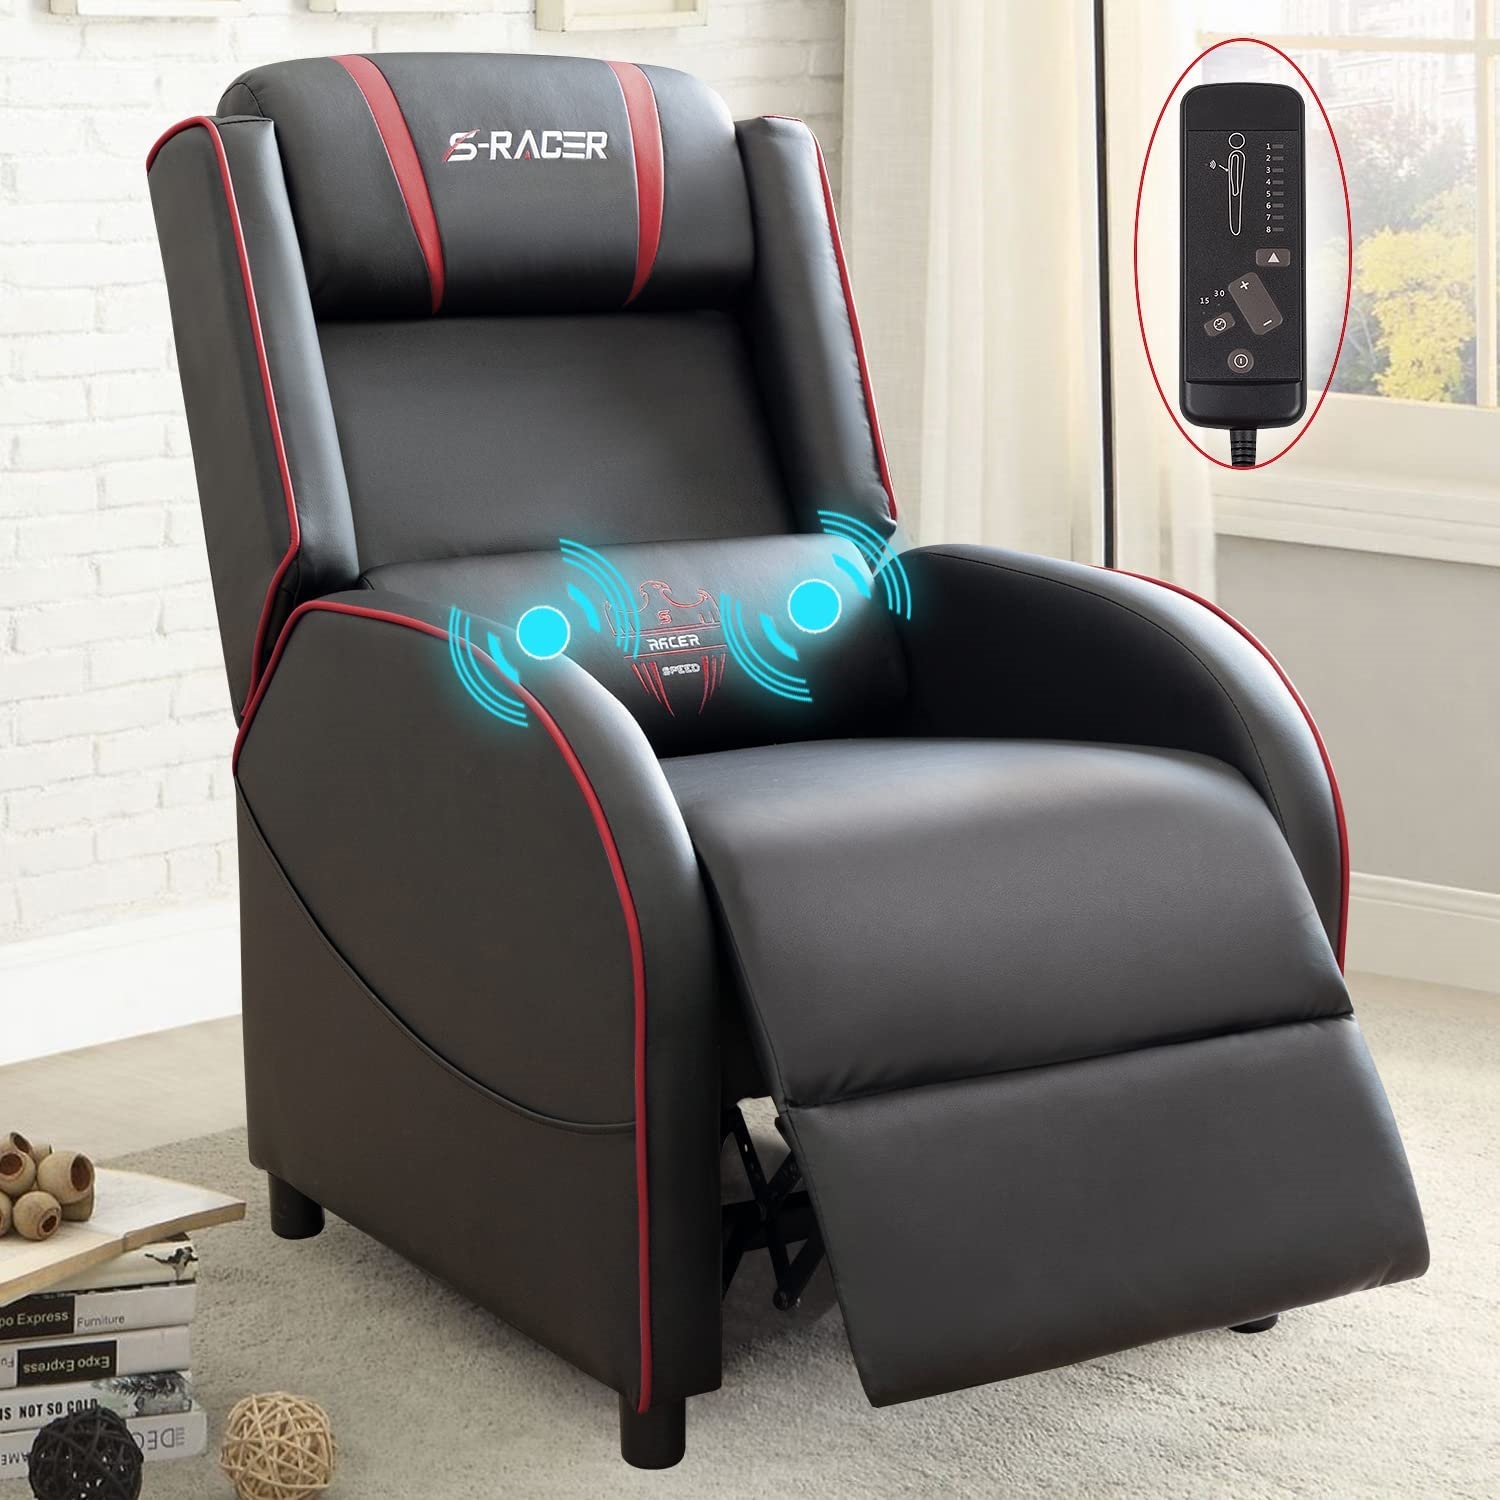 Homall Gaming Recliner Chair Racing Style Single Living Room Sofa Recliner